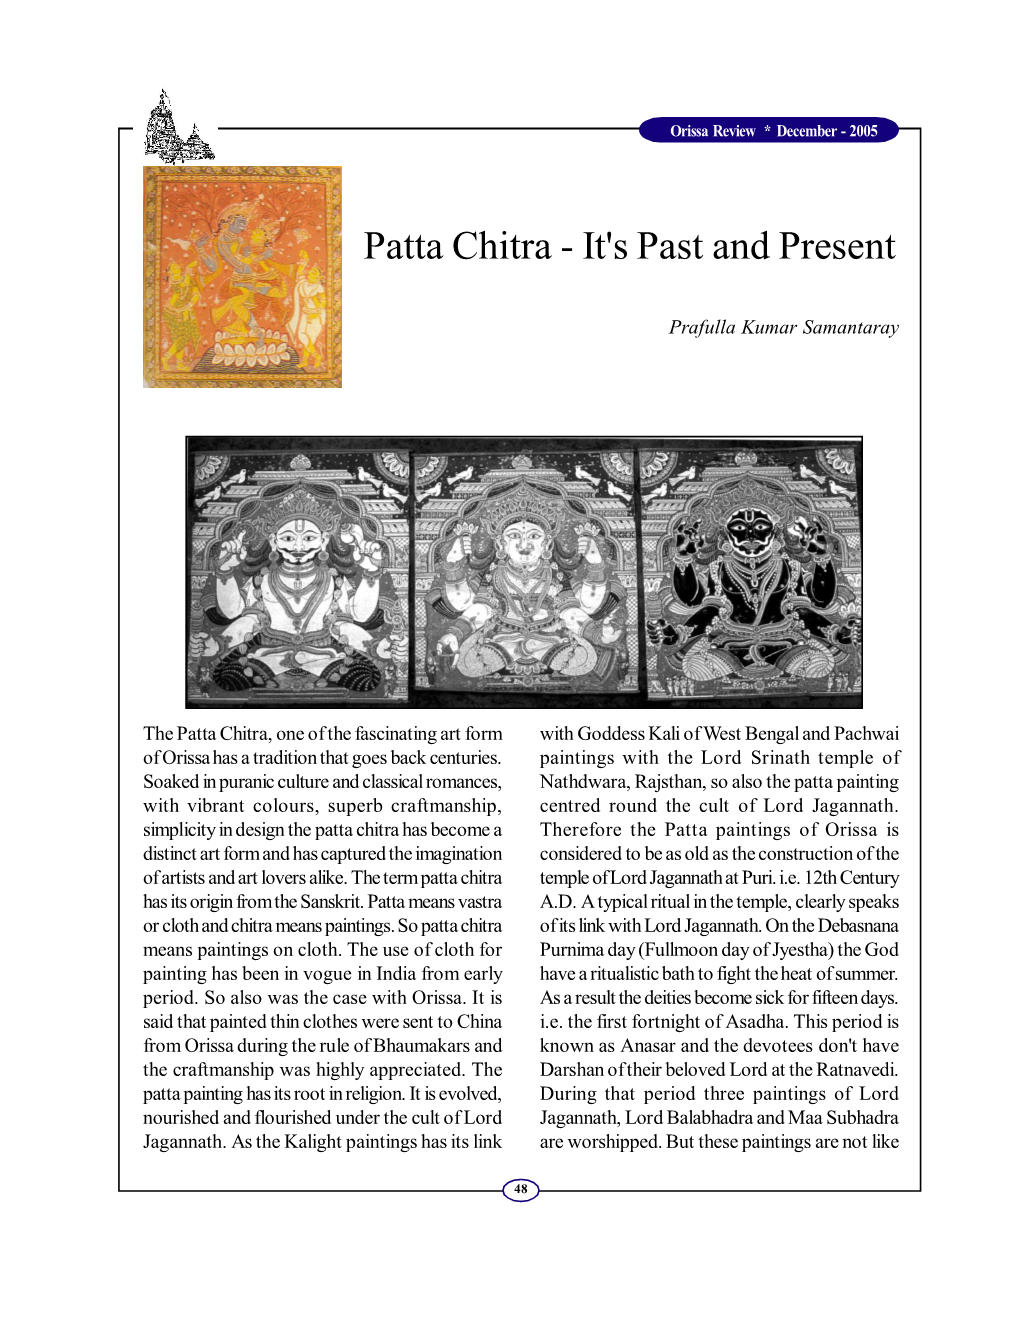 Patta Chitra - It's Past and Present